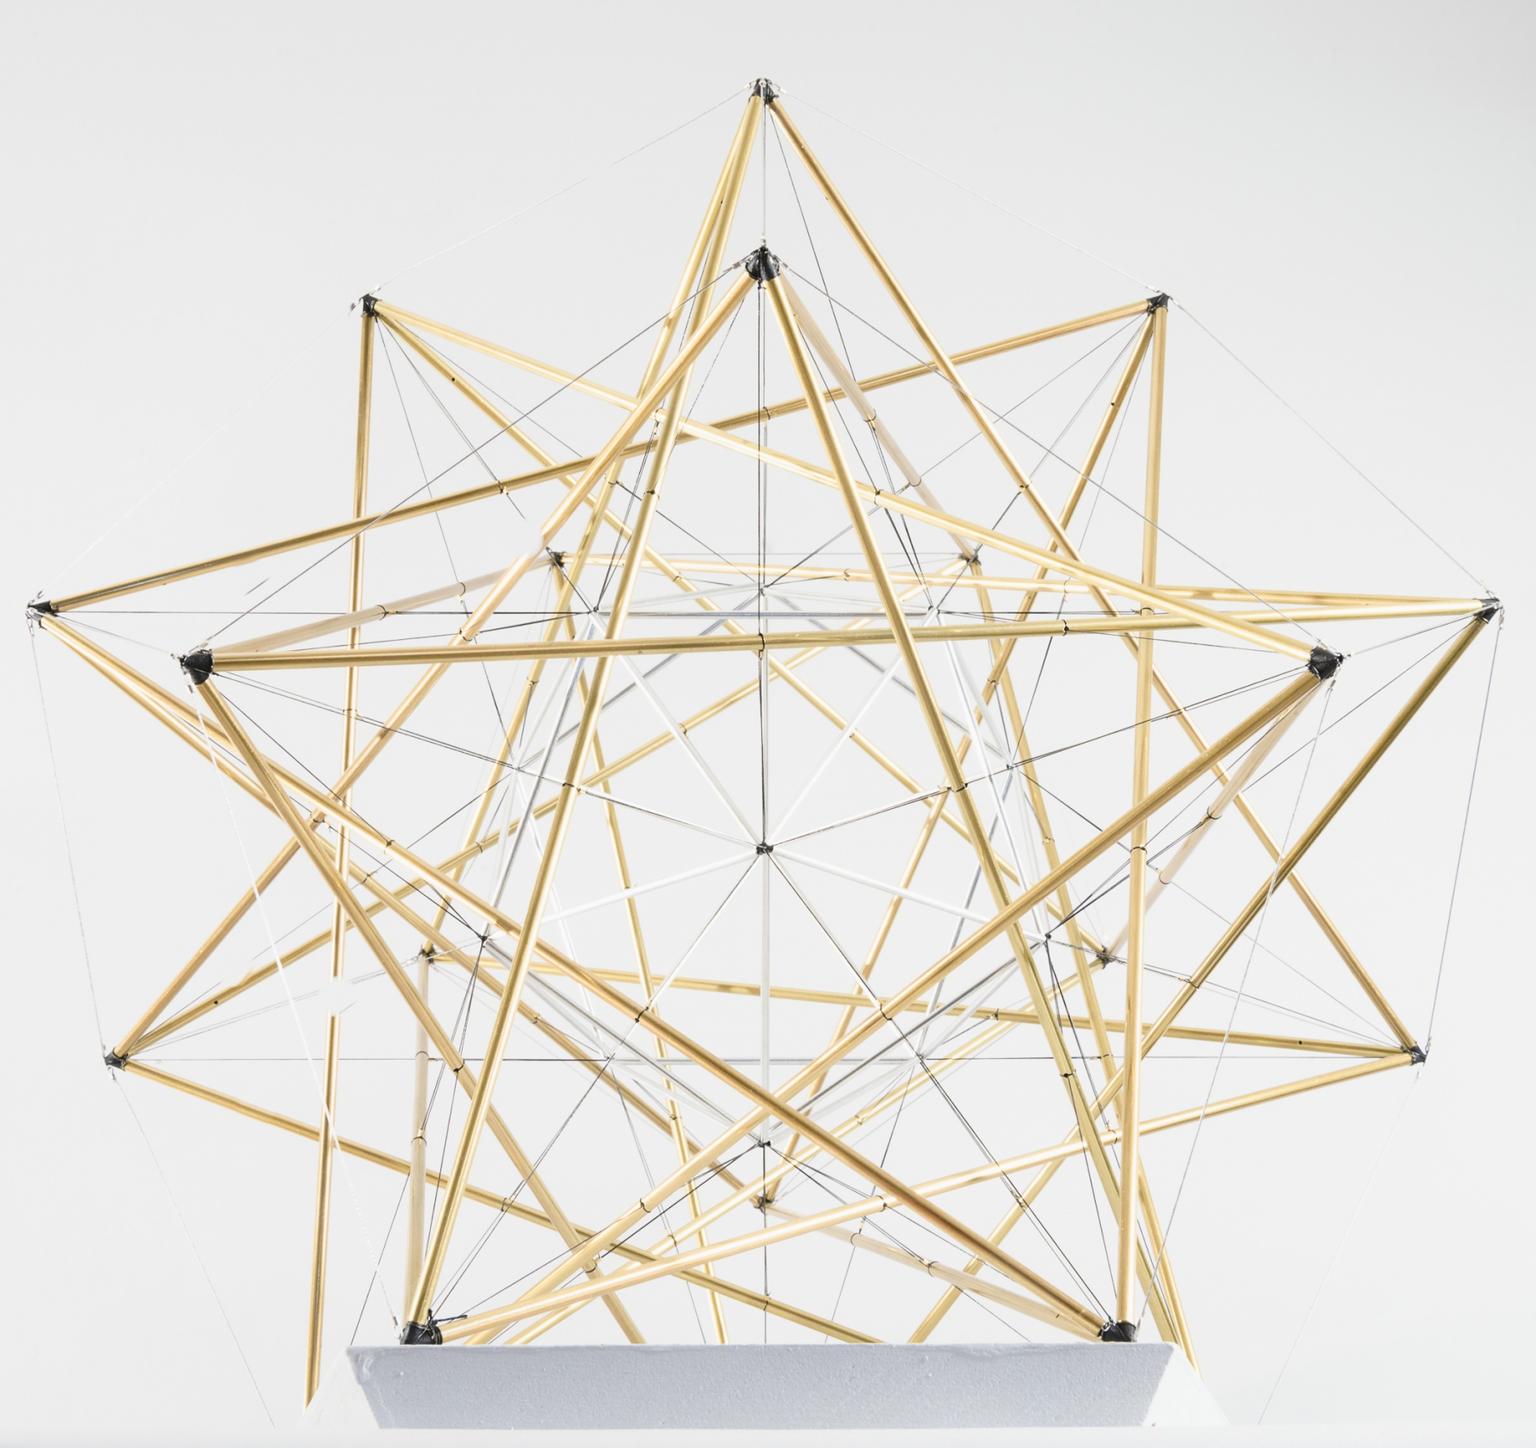 Image for entry 'Five Tetrahedra in Tensegrity'